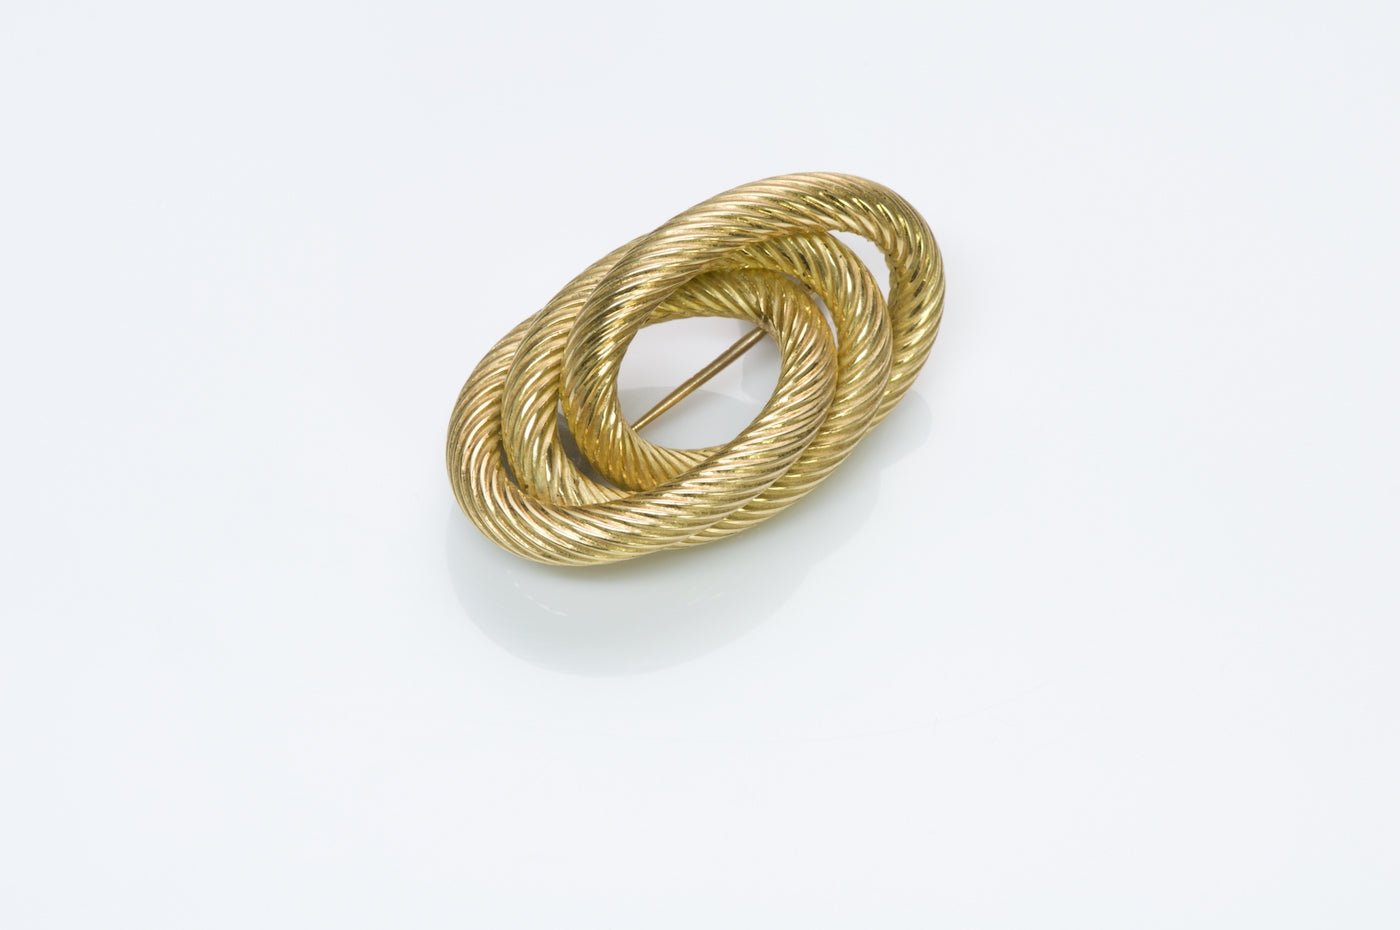 Tiffany & Co. Gold Rope Knot Brooch